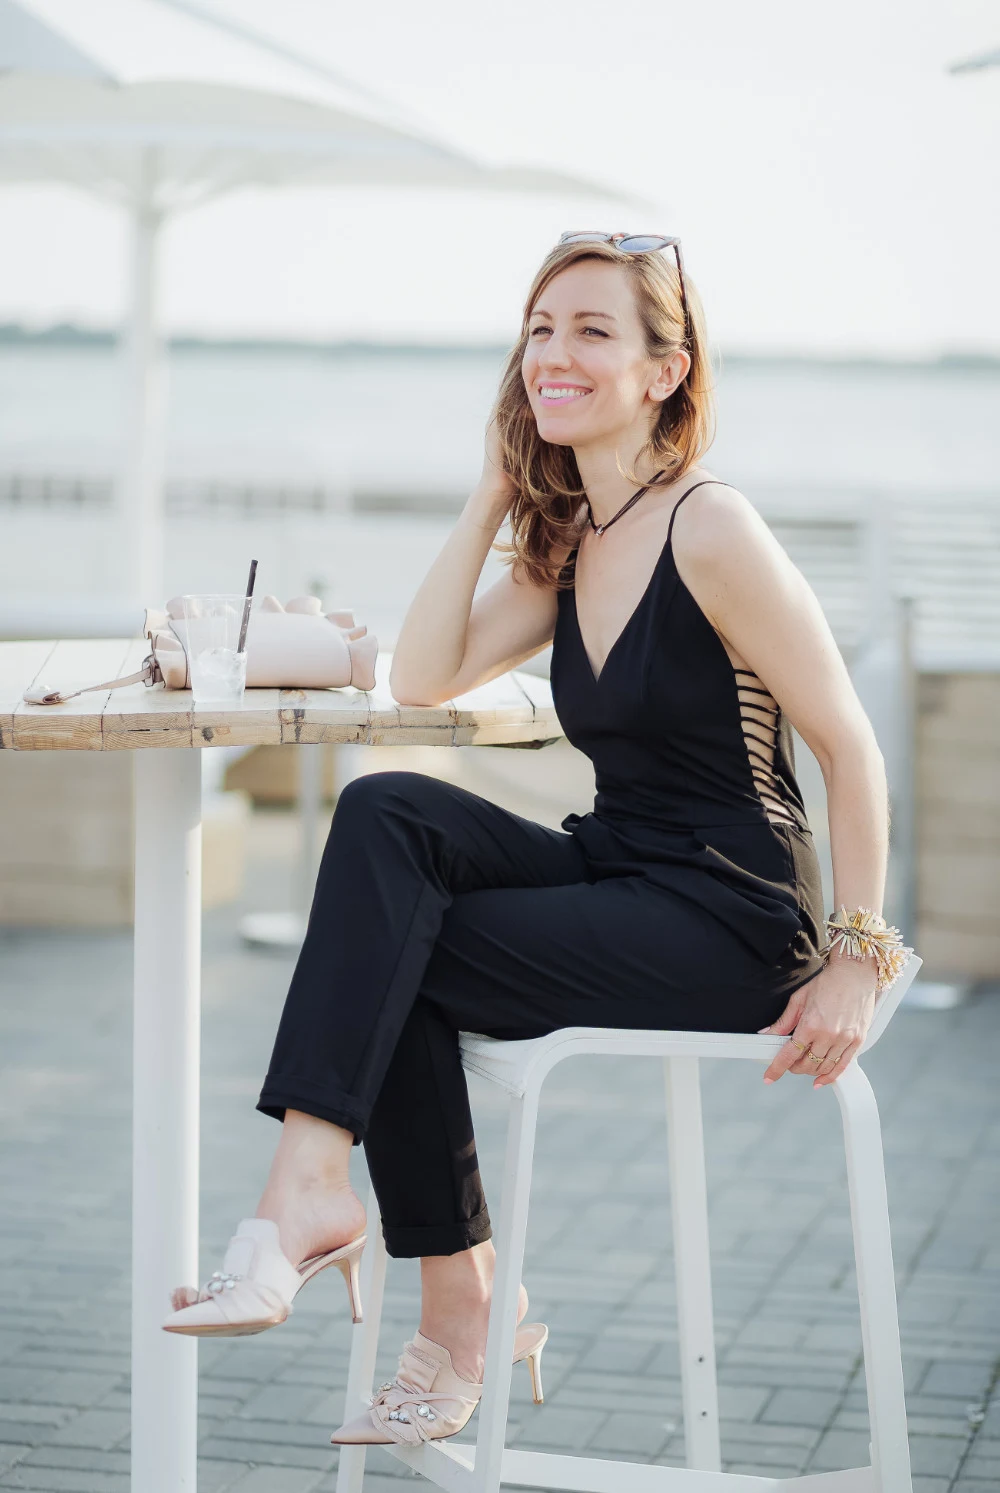 5 Best Shoes to Wear with Jumpsuits - Women's Outfit Tips